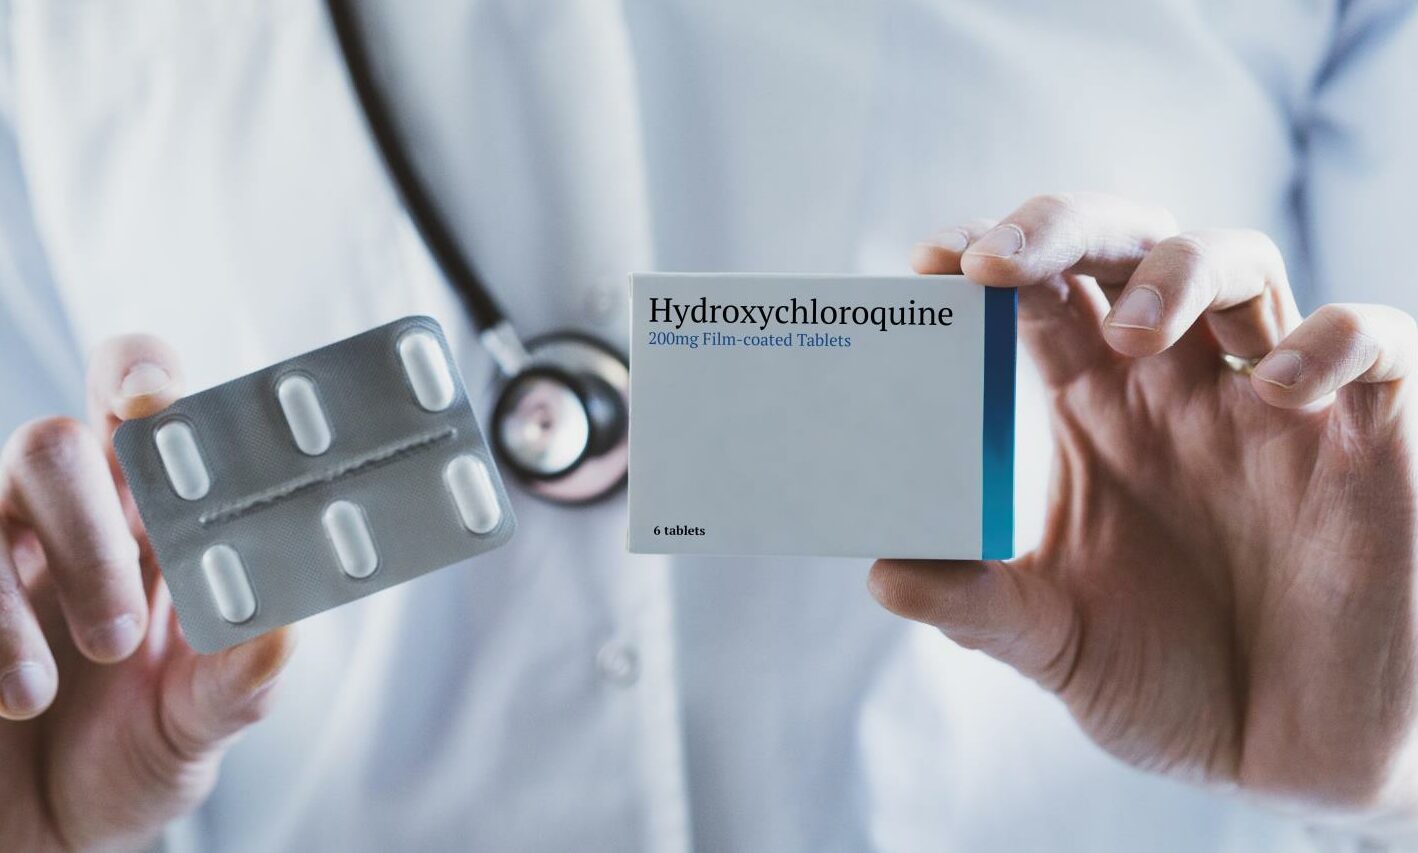 Donald Trump advocated for the use of hydroxychloroquine as a treatment for Covid-19.